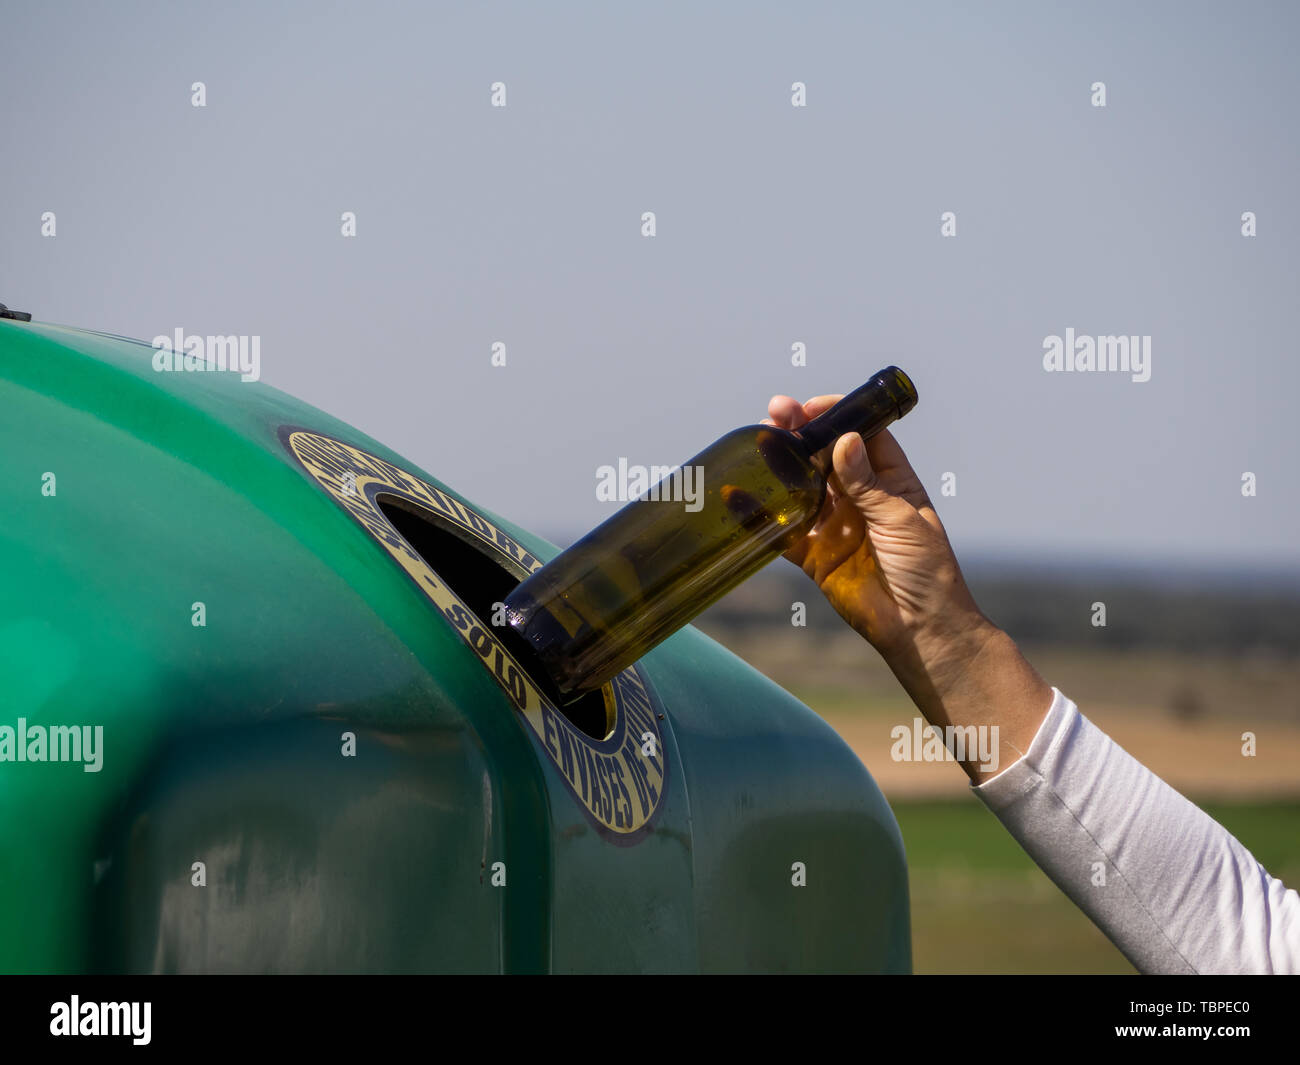 A mature woman pulling a crystal bottle in a green bin for recycling glass with the spanish text 'only glass containers' Stock Photo